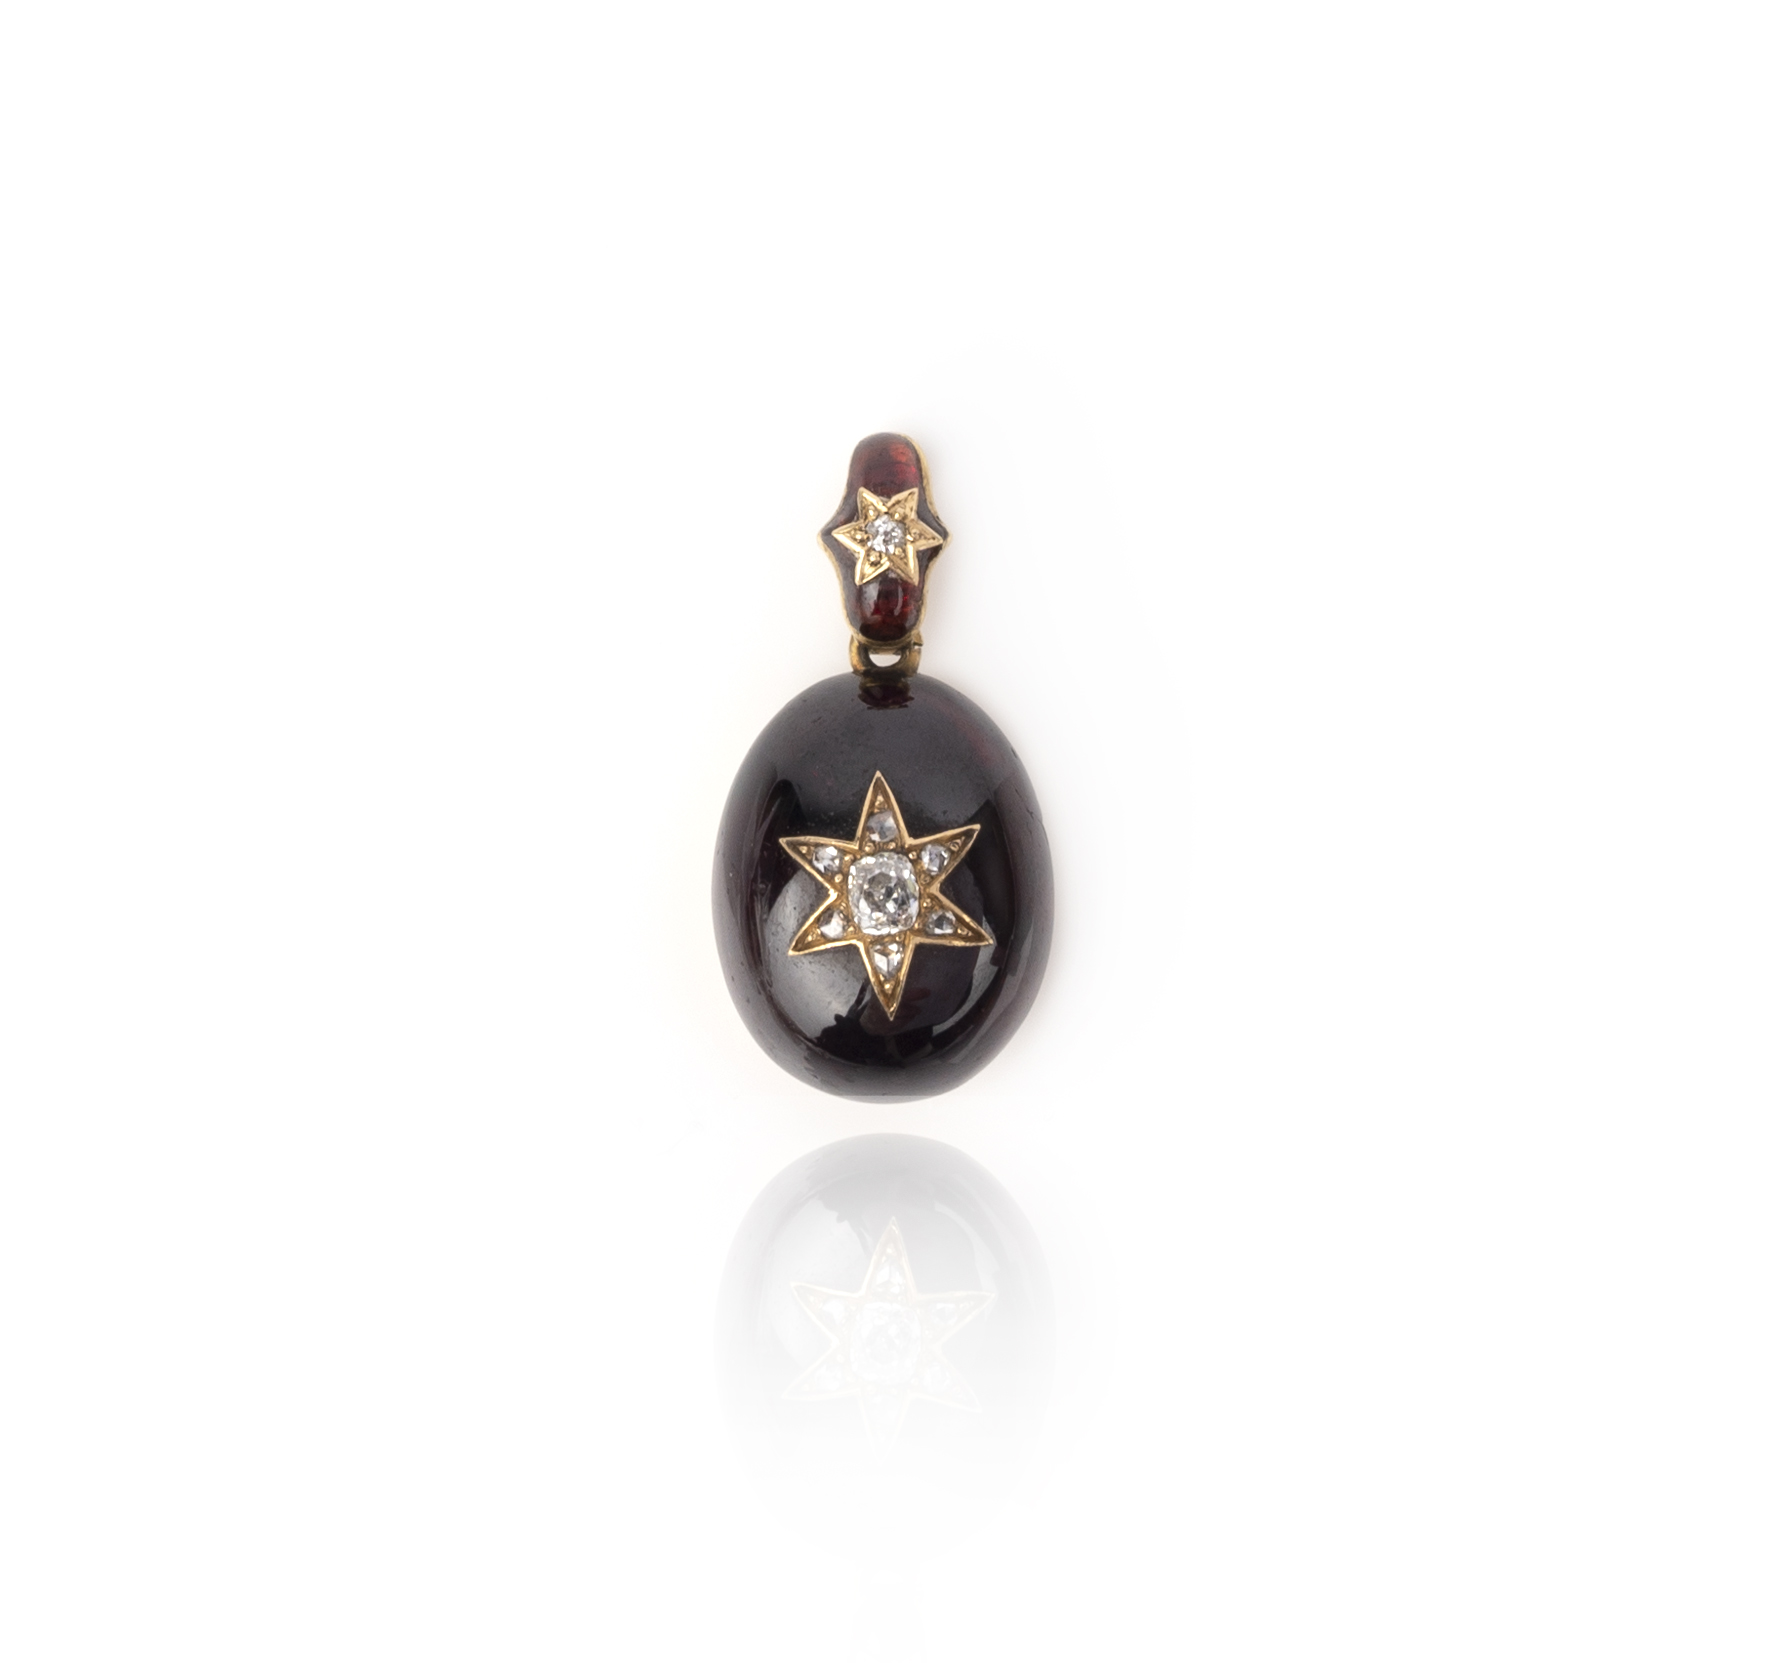 A garnet and diamond mourning pendant, mid 19th century, composed of a cabochon garnet drop, set